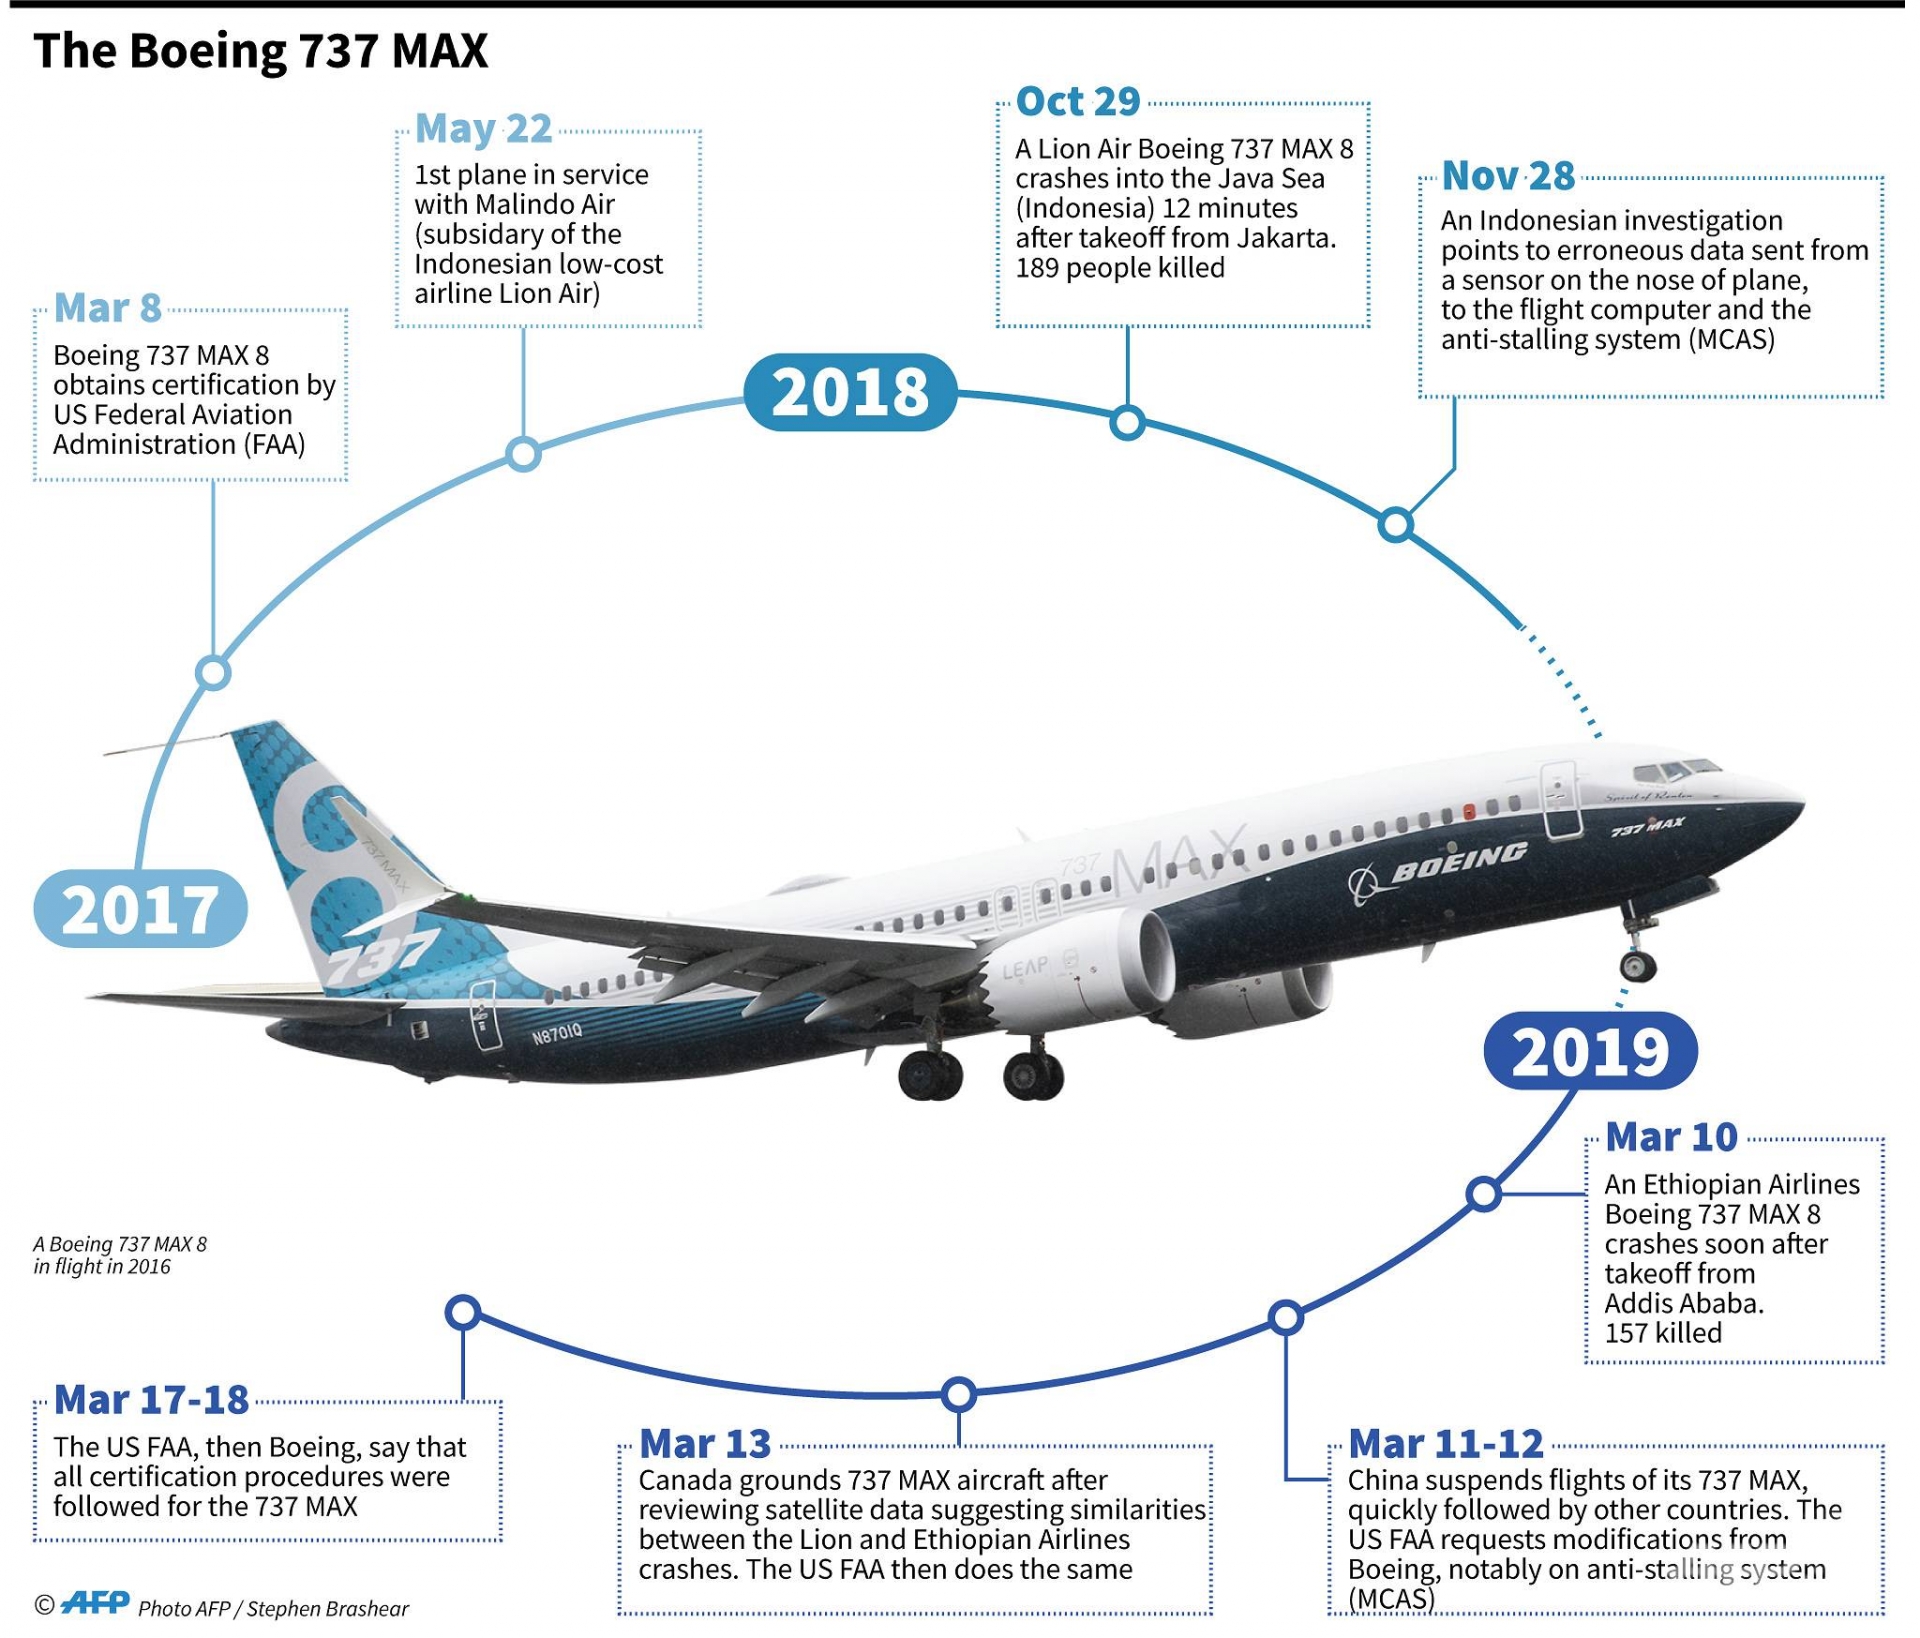 Indonesia"s Garuda cancelling 49 Boeing 737 MAX 8 plane orders after crashes